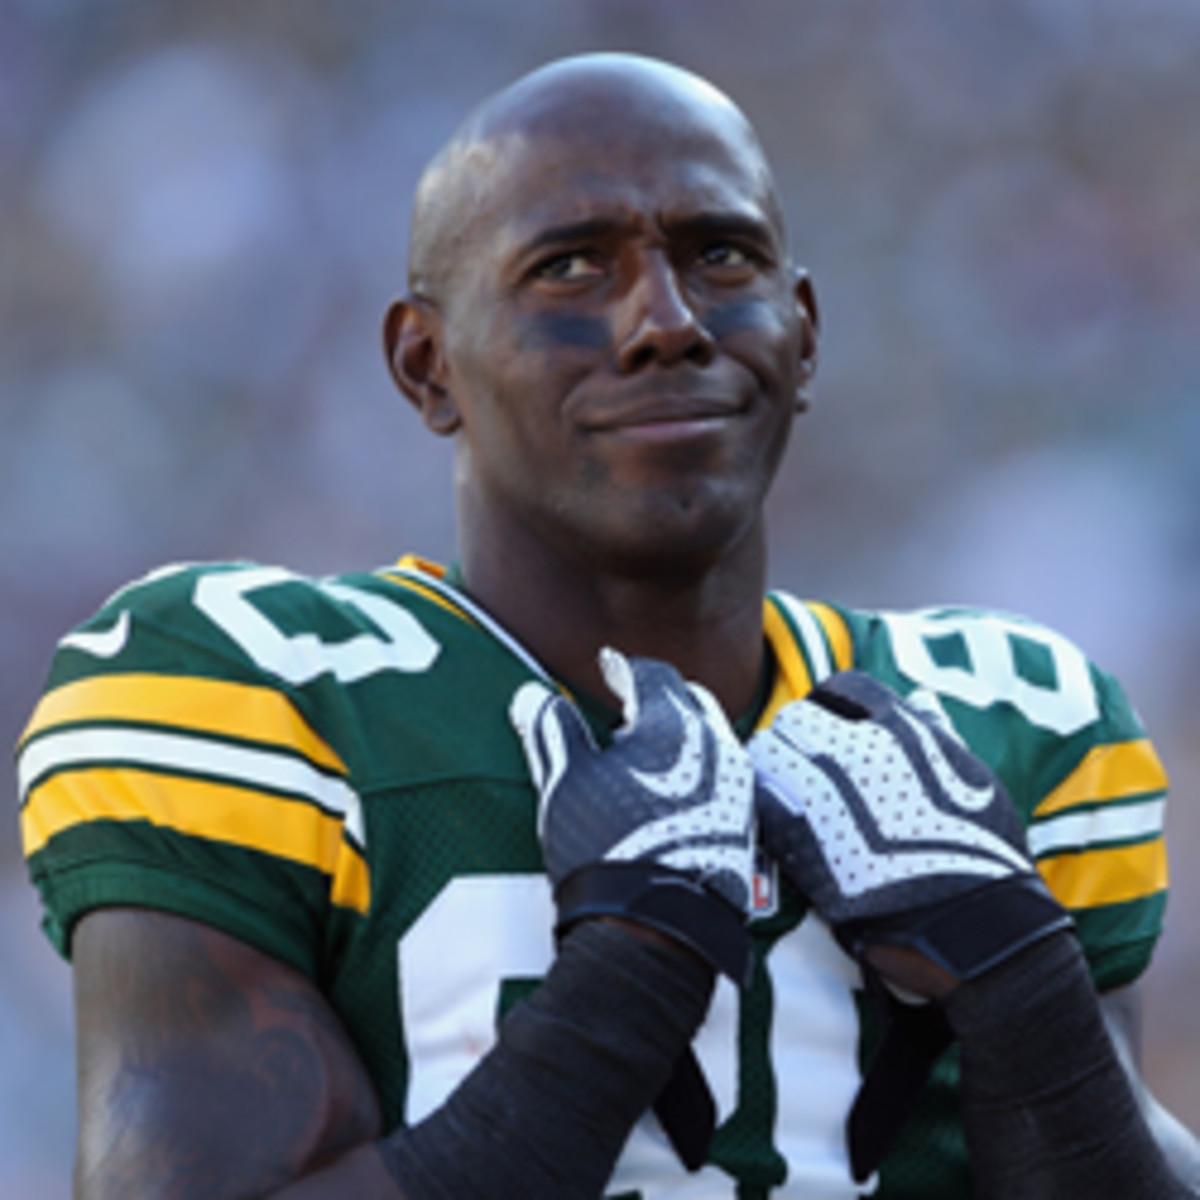 Donald Driver reportedly will consider retirement after 14 years with the Packers. (Jeff Gross/Getty Images)